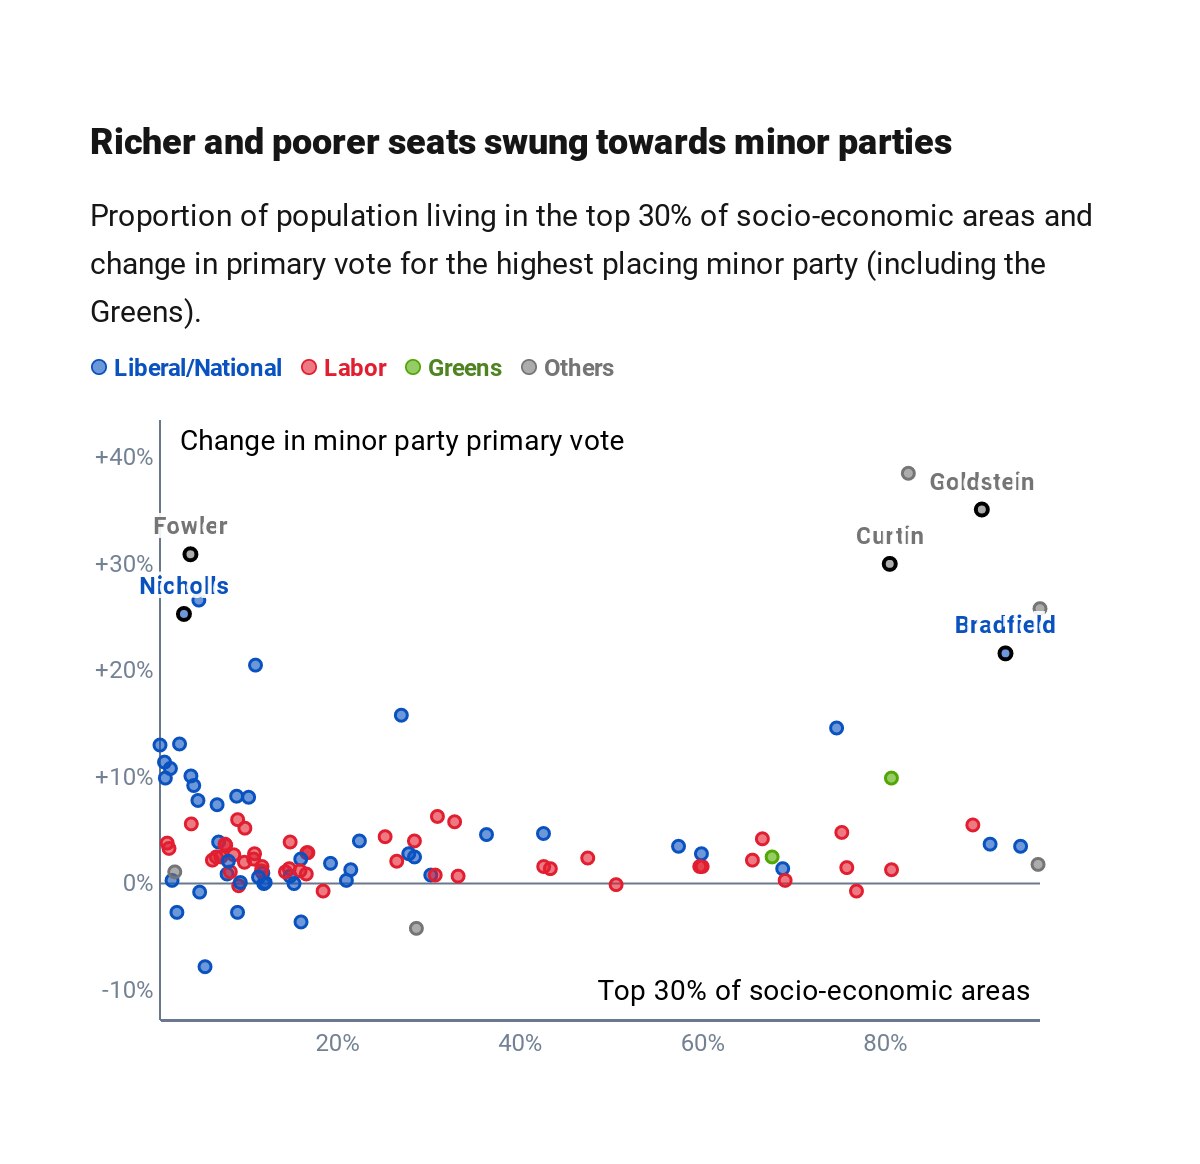 A scatterplot showing high and low socio-economic areas swung more towards minor parties including the Greens